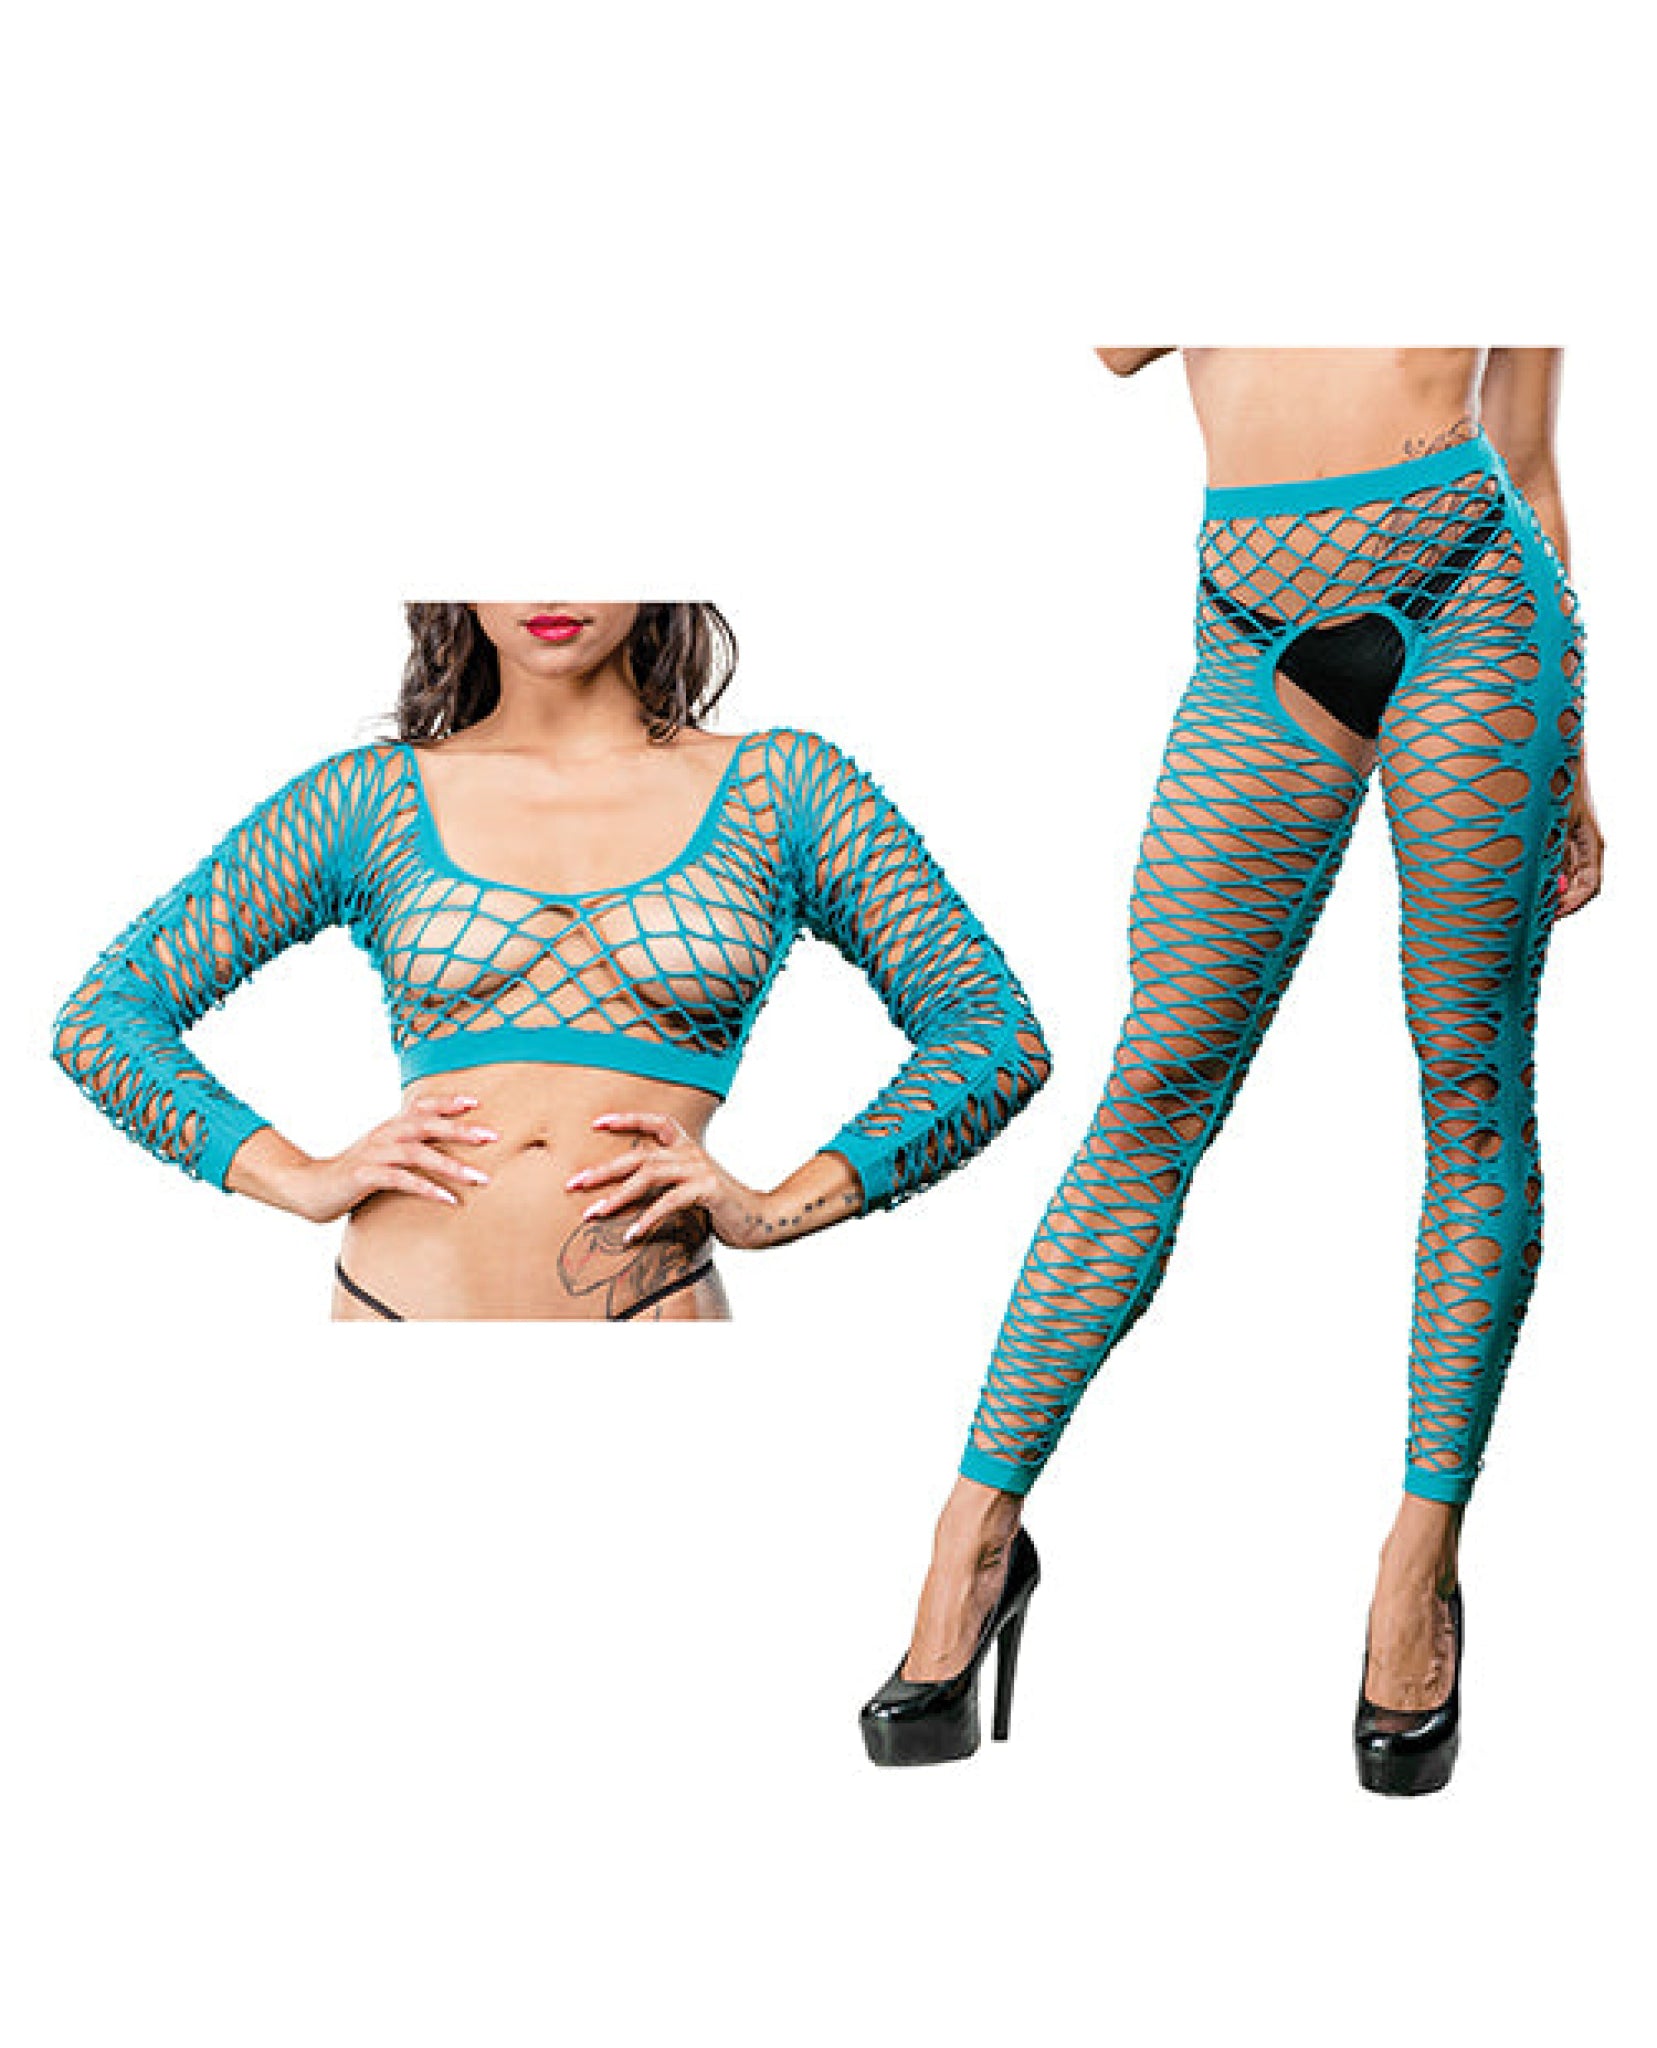 Beverly Hills Naughty Girl Crotchless Front Mesh & Side Design Leggings O/s Beverly Hills Naughty Girl